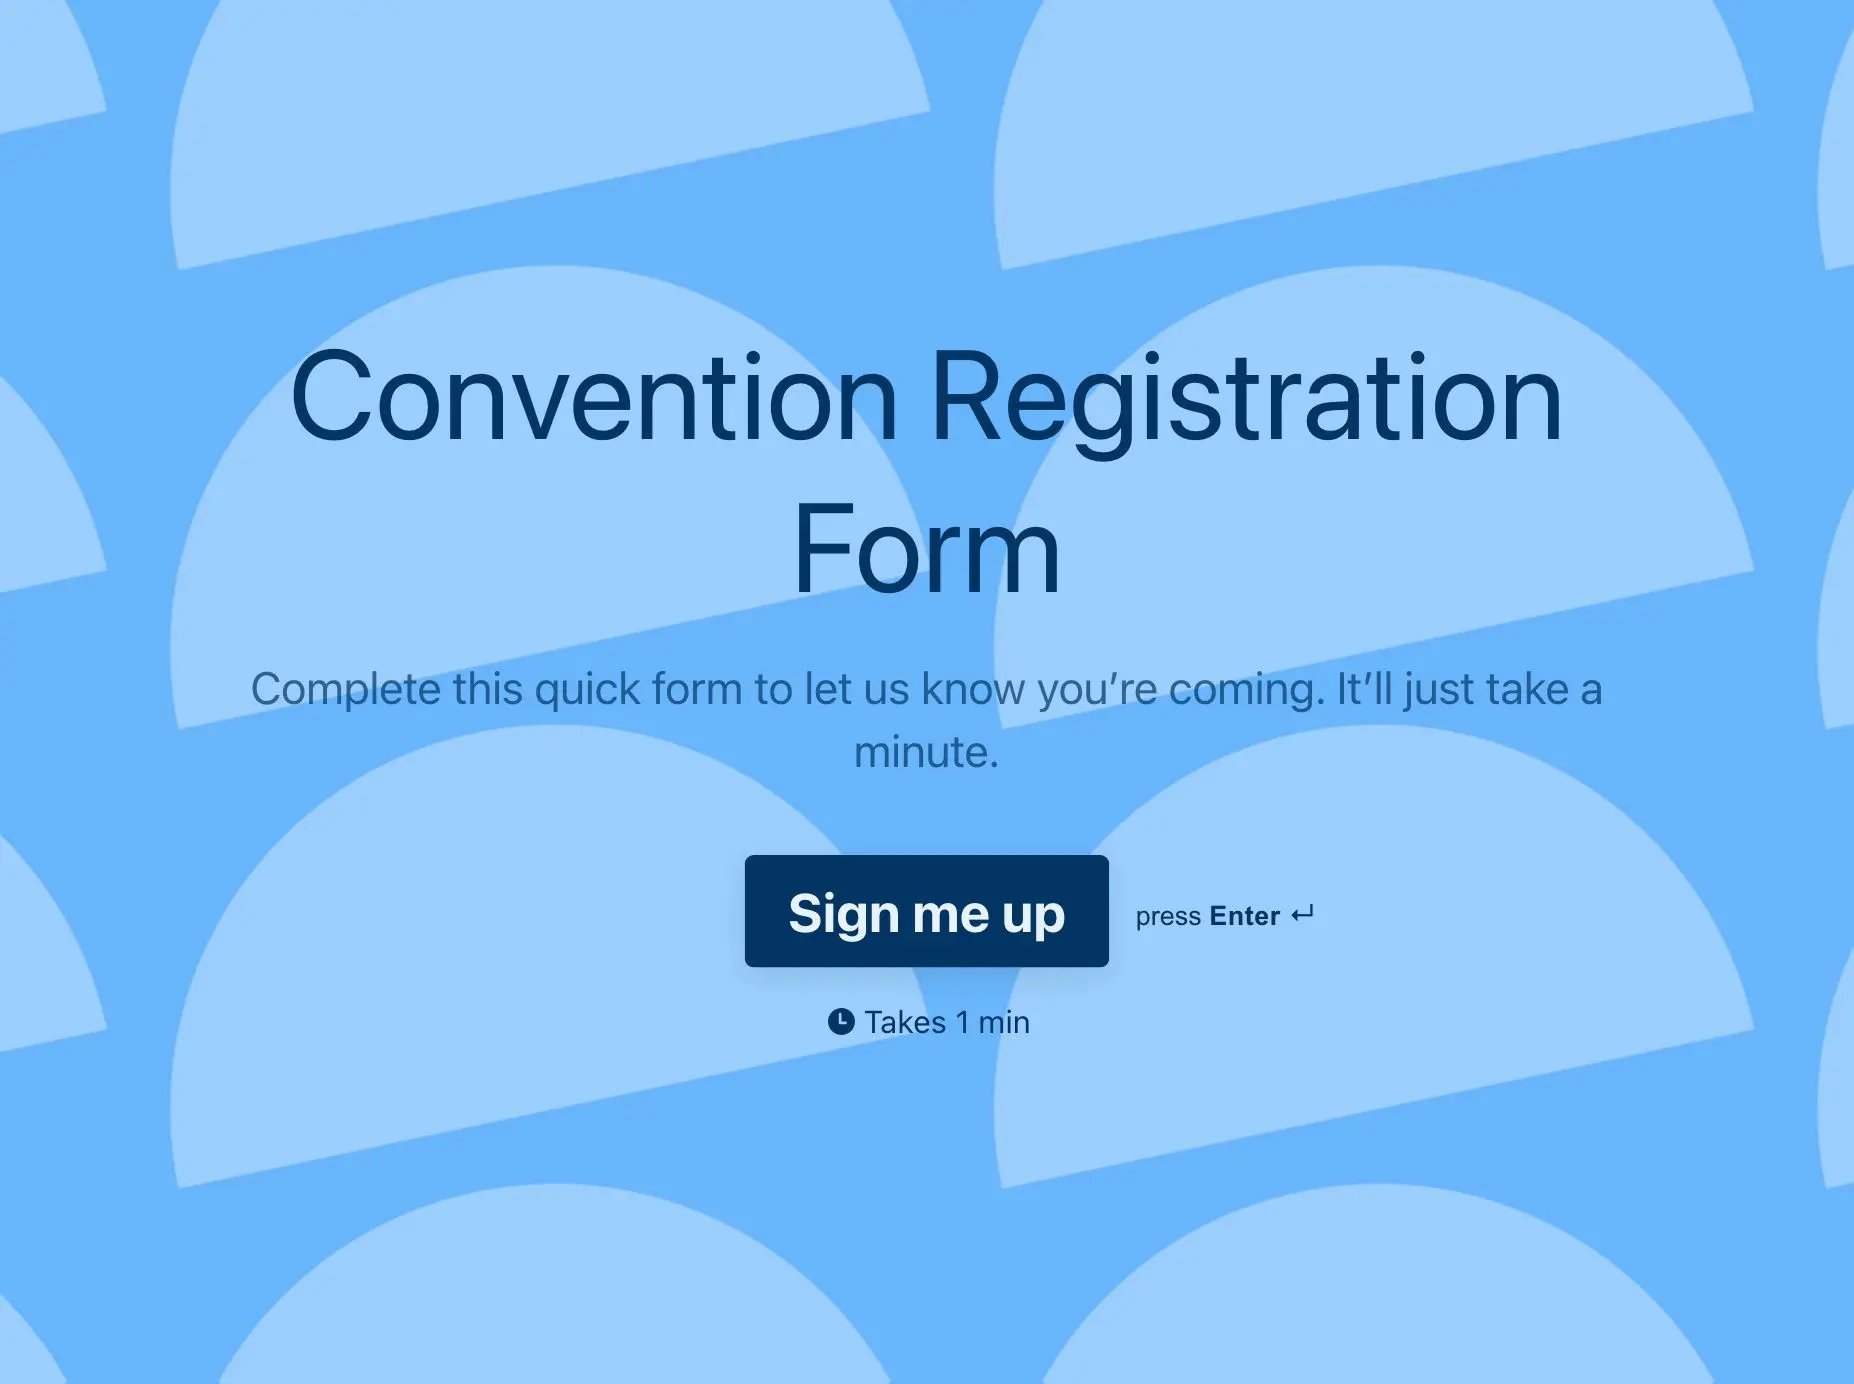 Convention Registration Form Template Hero